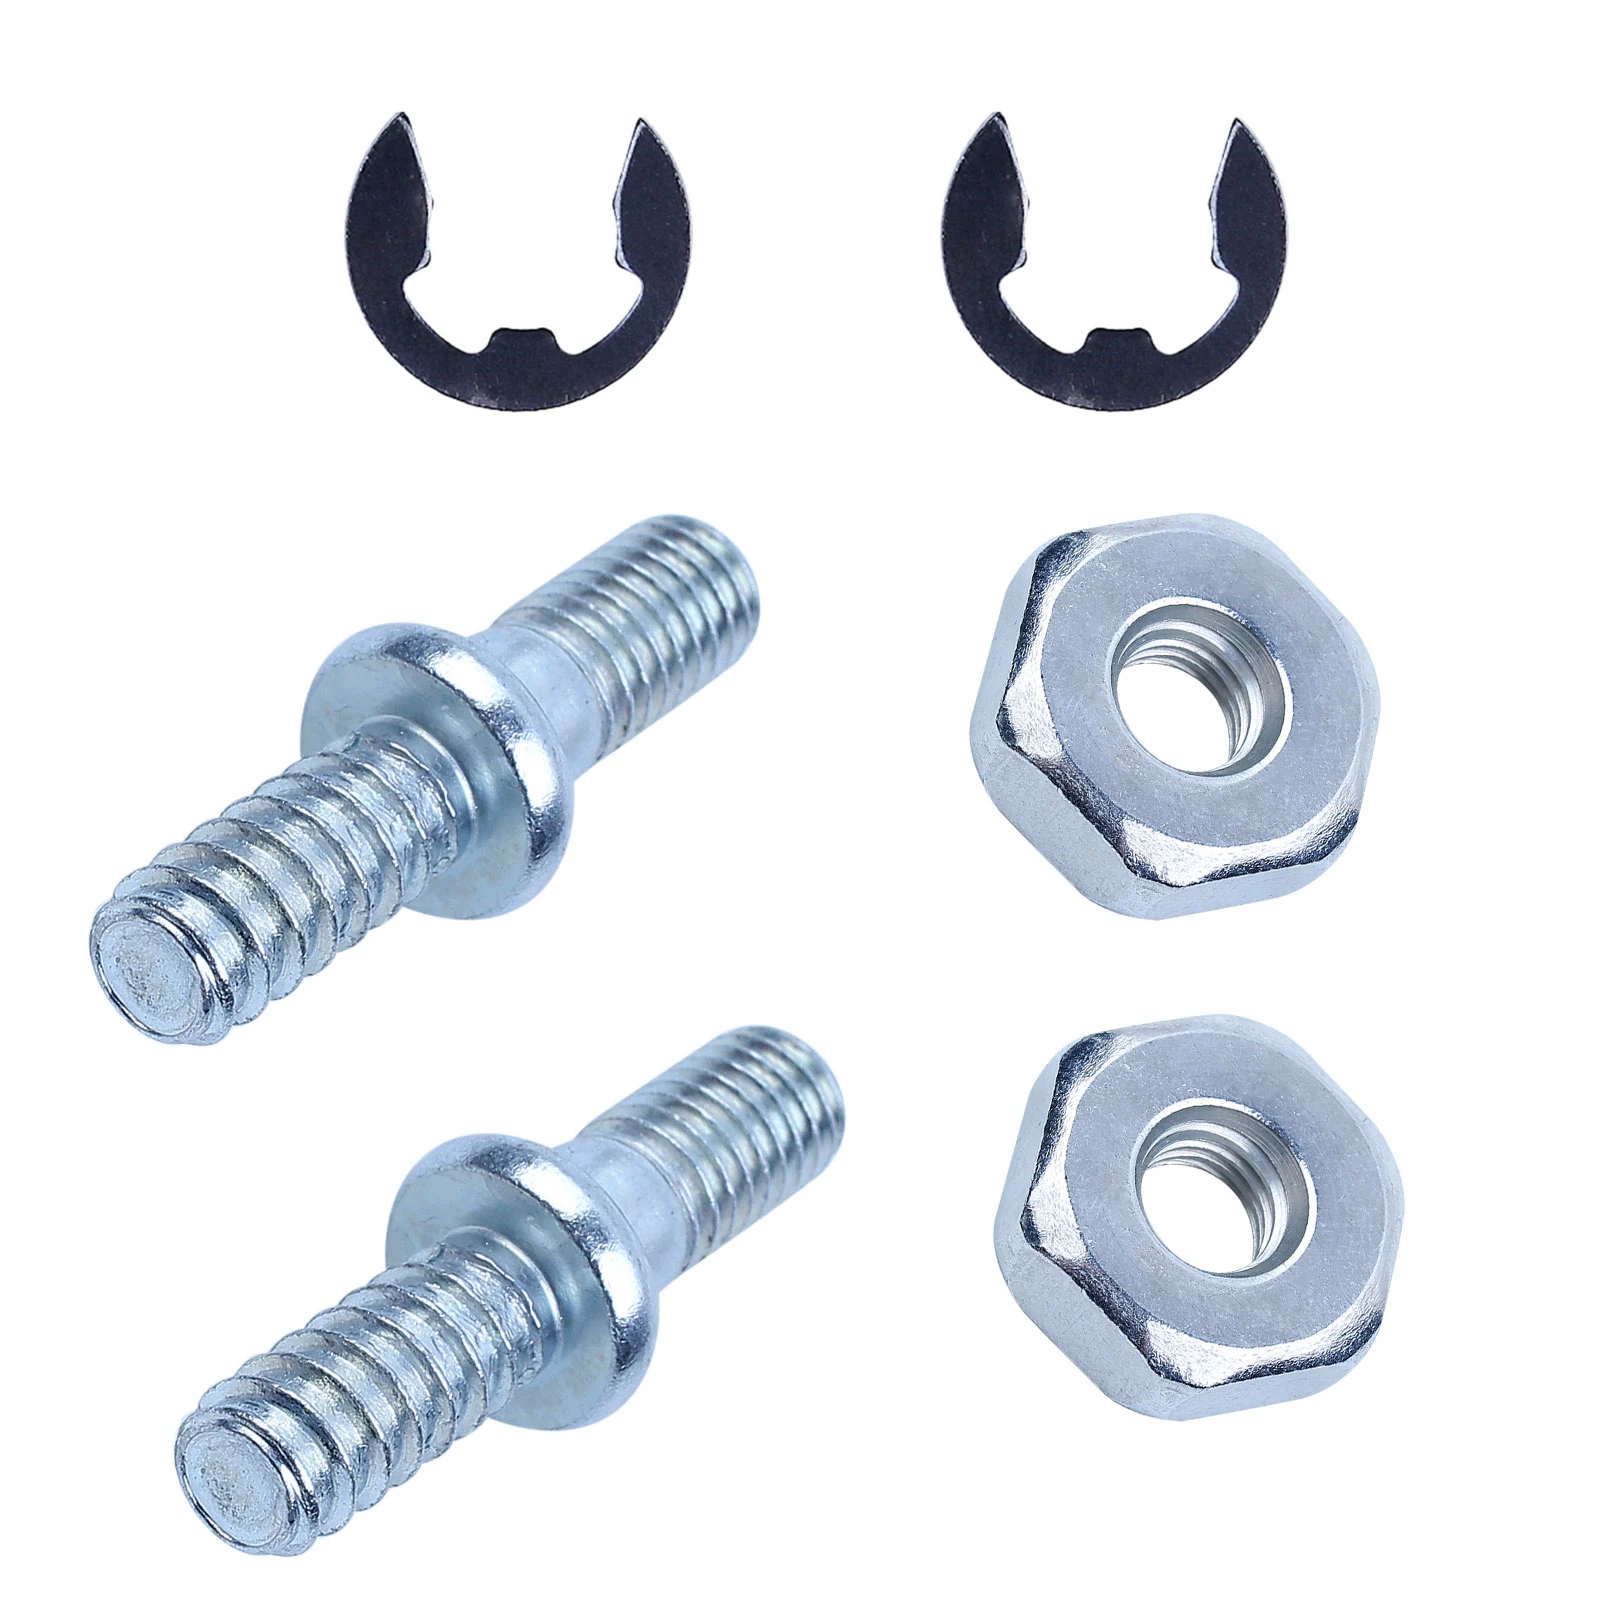 

2Pcs Adjuster Tensioner Bar Studs & Nuts for Stihl MS170 MS180 017 018 021 023 025 MS210 MS230 MS250 Chainsaw